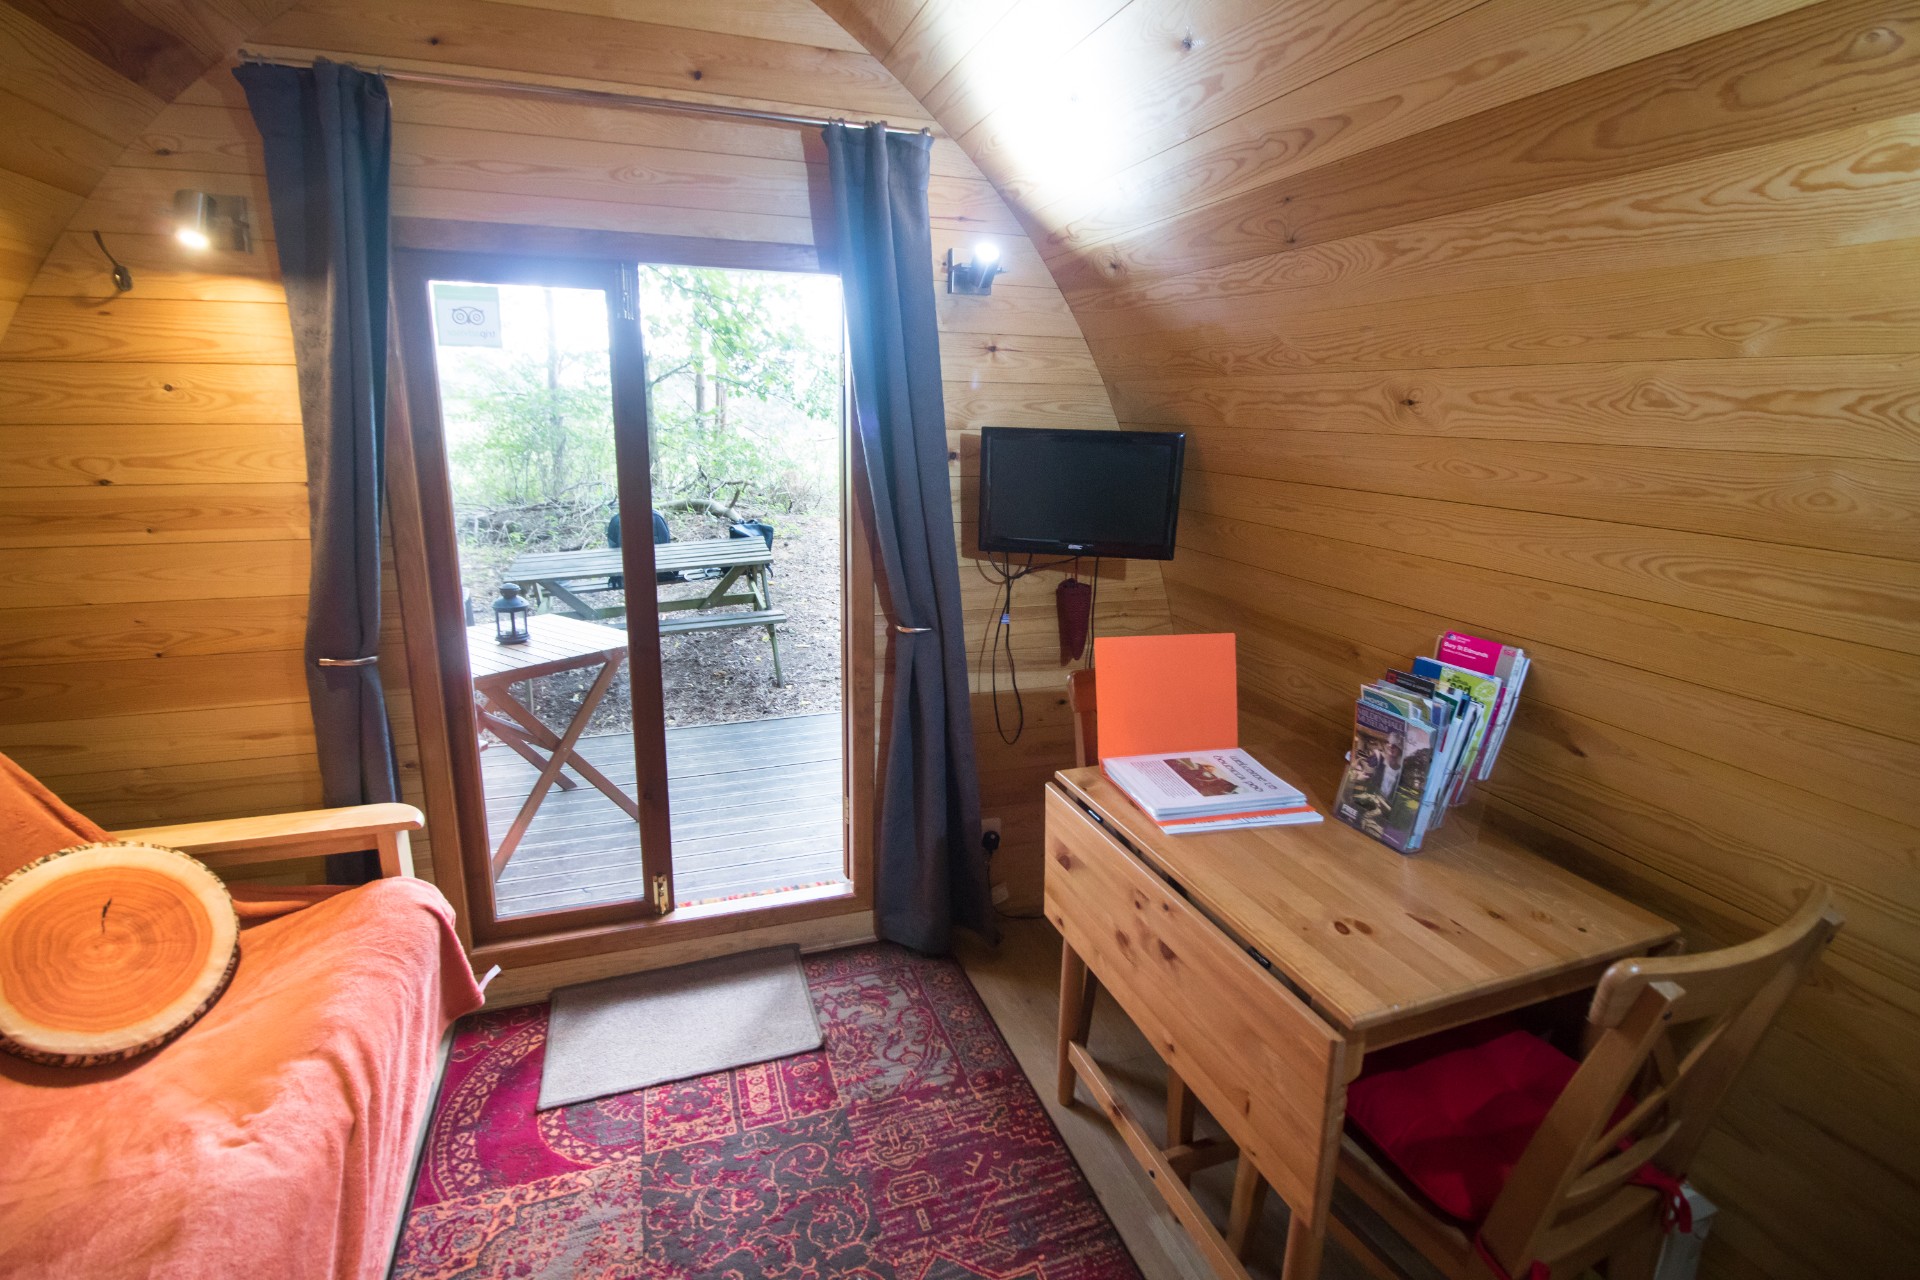 Glamping in a Suffolk Woodland at West Stow Pods. West Stow. Culford. Bury St Edmunds. Suffolk. Cambridge. Cambridgeshire. Anglo Saxon Village and Lakes. Mega Pod. Quirky, unique accommodation. Click through to read more...